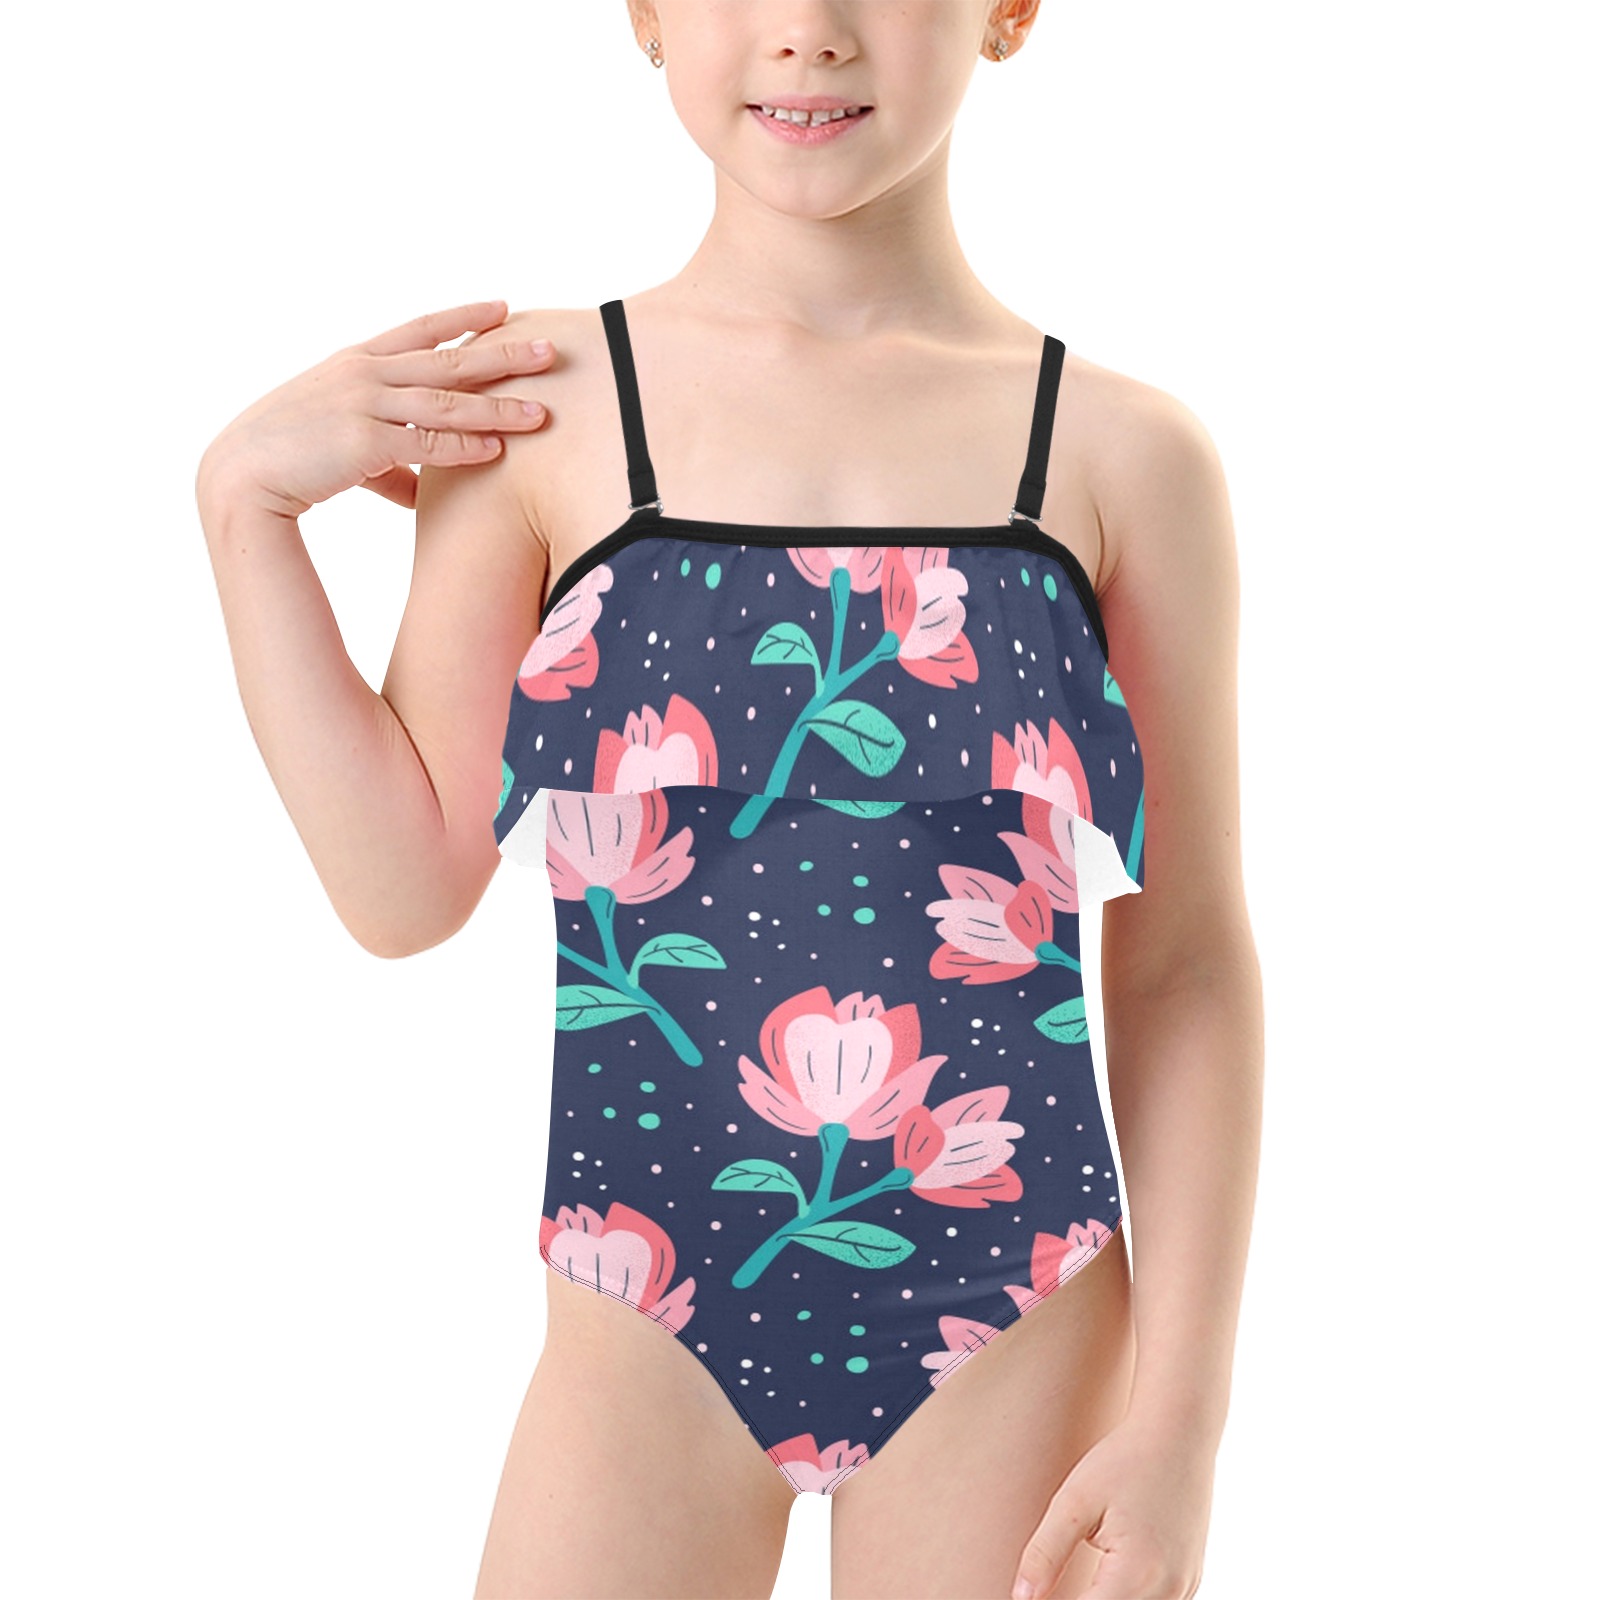 Adorable Pink Floral Kids' Spaghetti Strap Ruffle Swimsuit (Model S26)